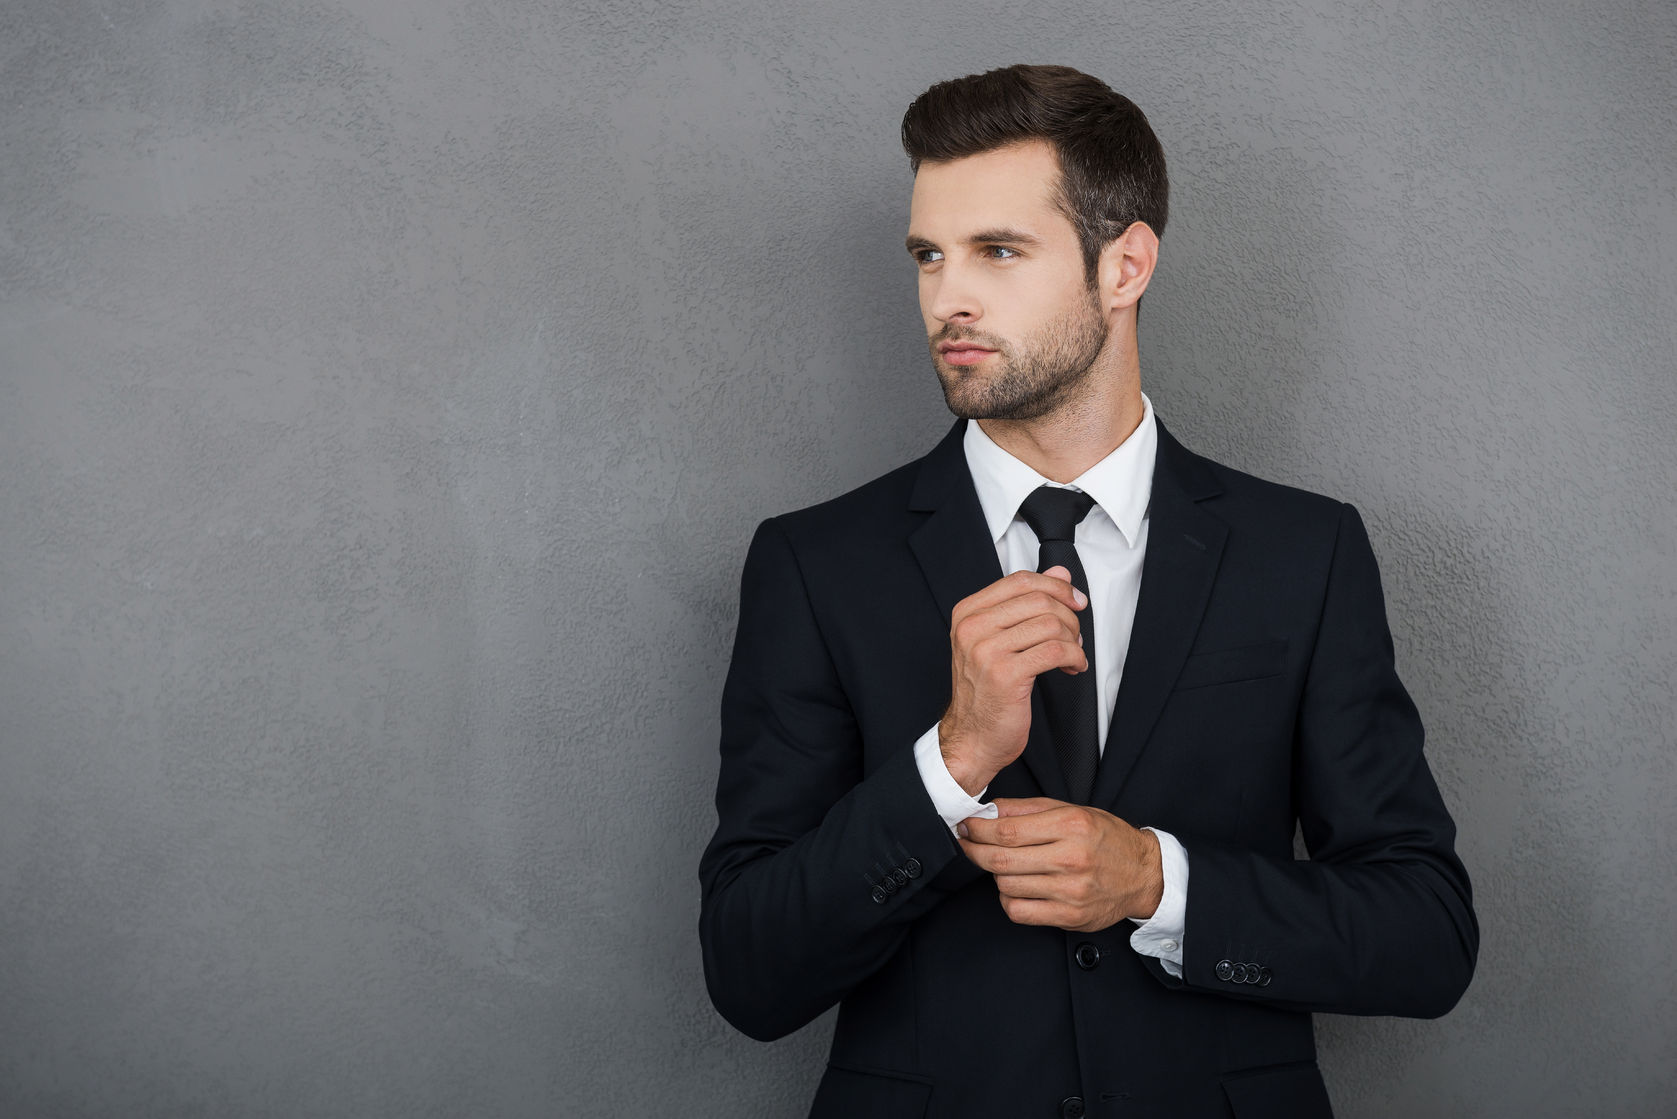 The Ultimate Guide To Finding The Right Custom Suit Fit